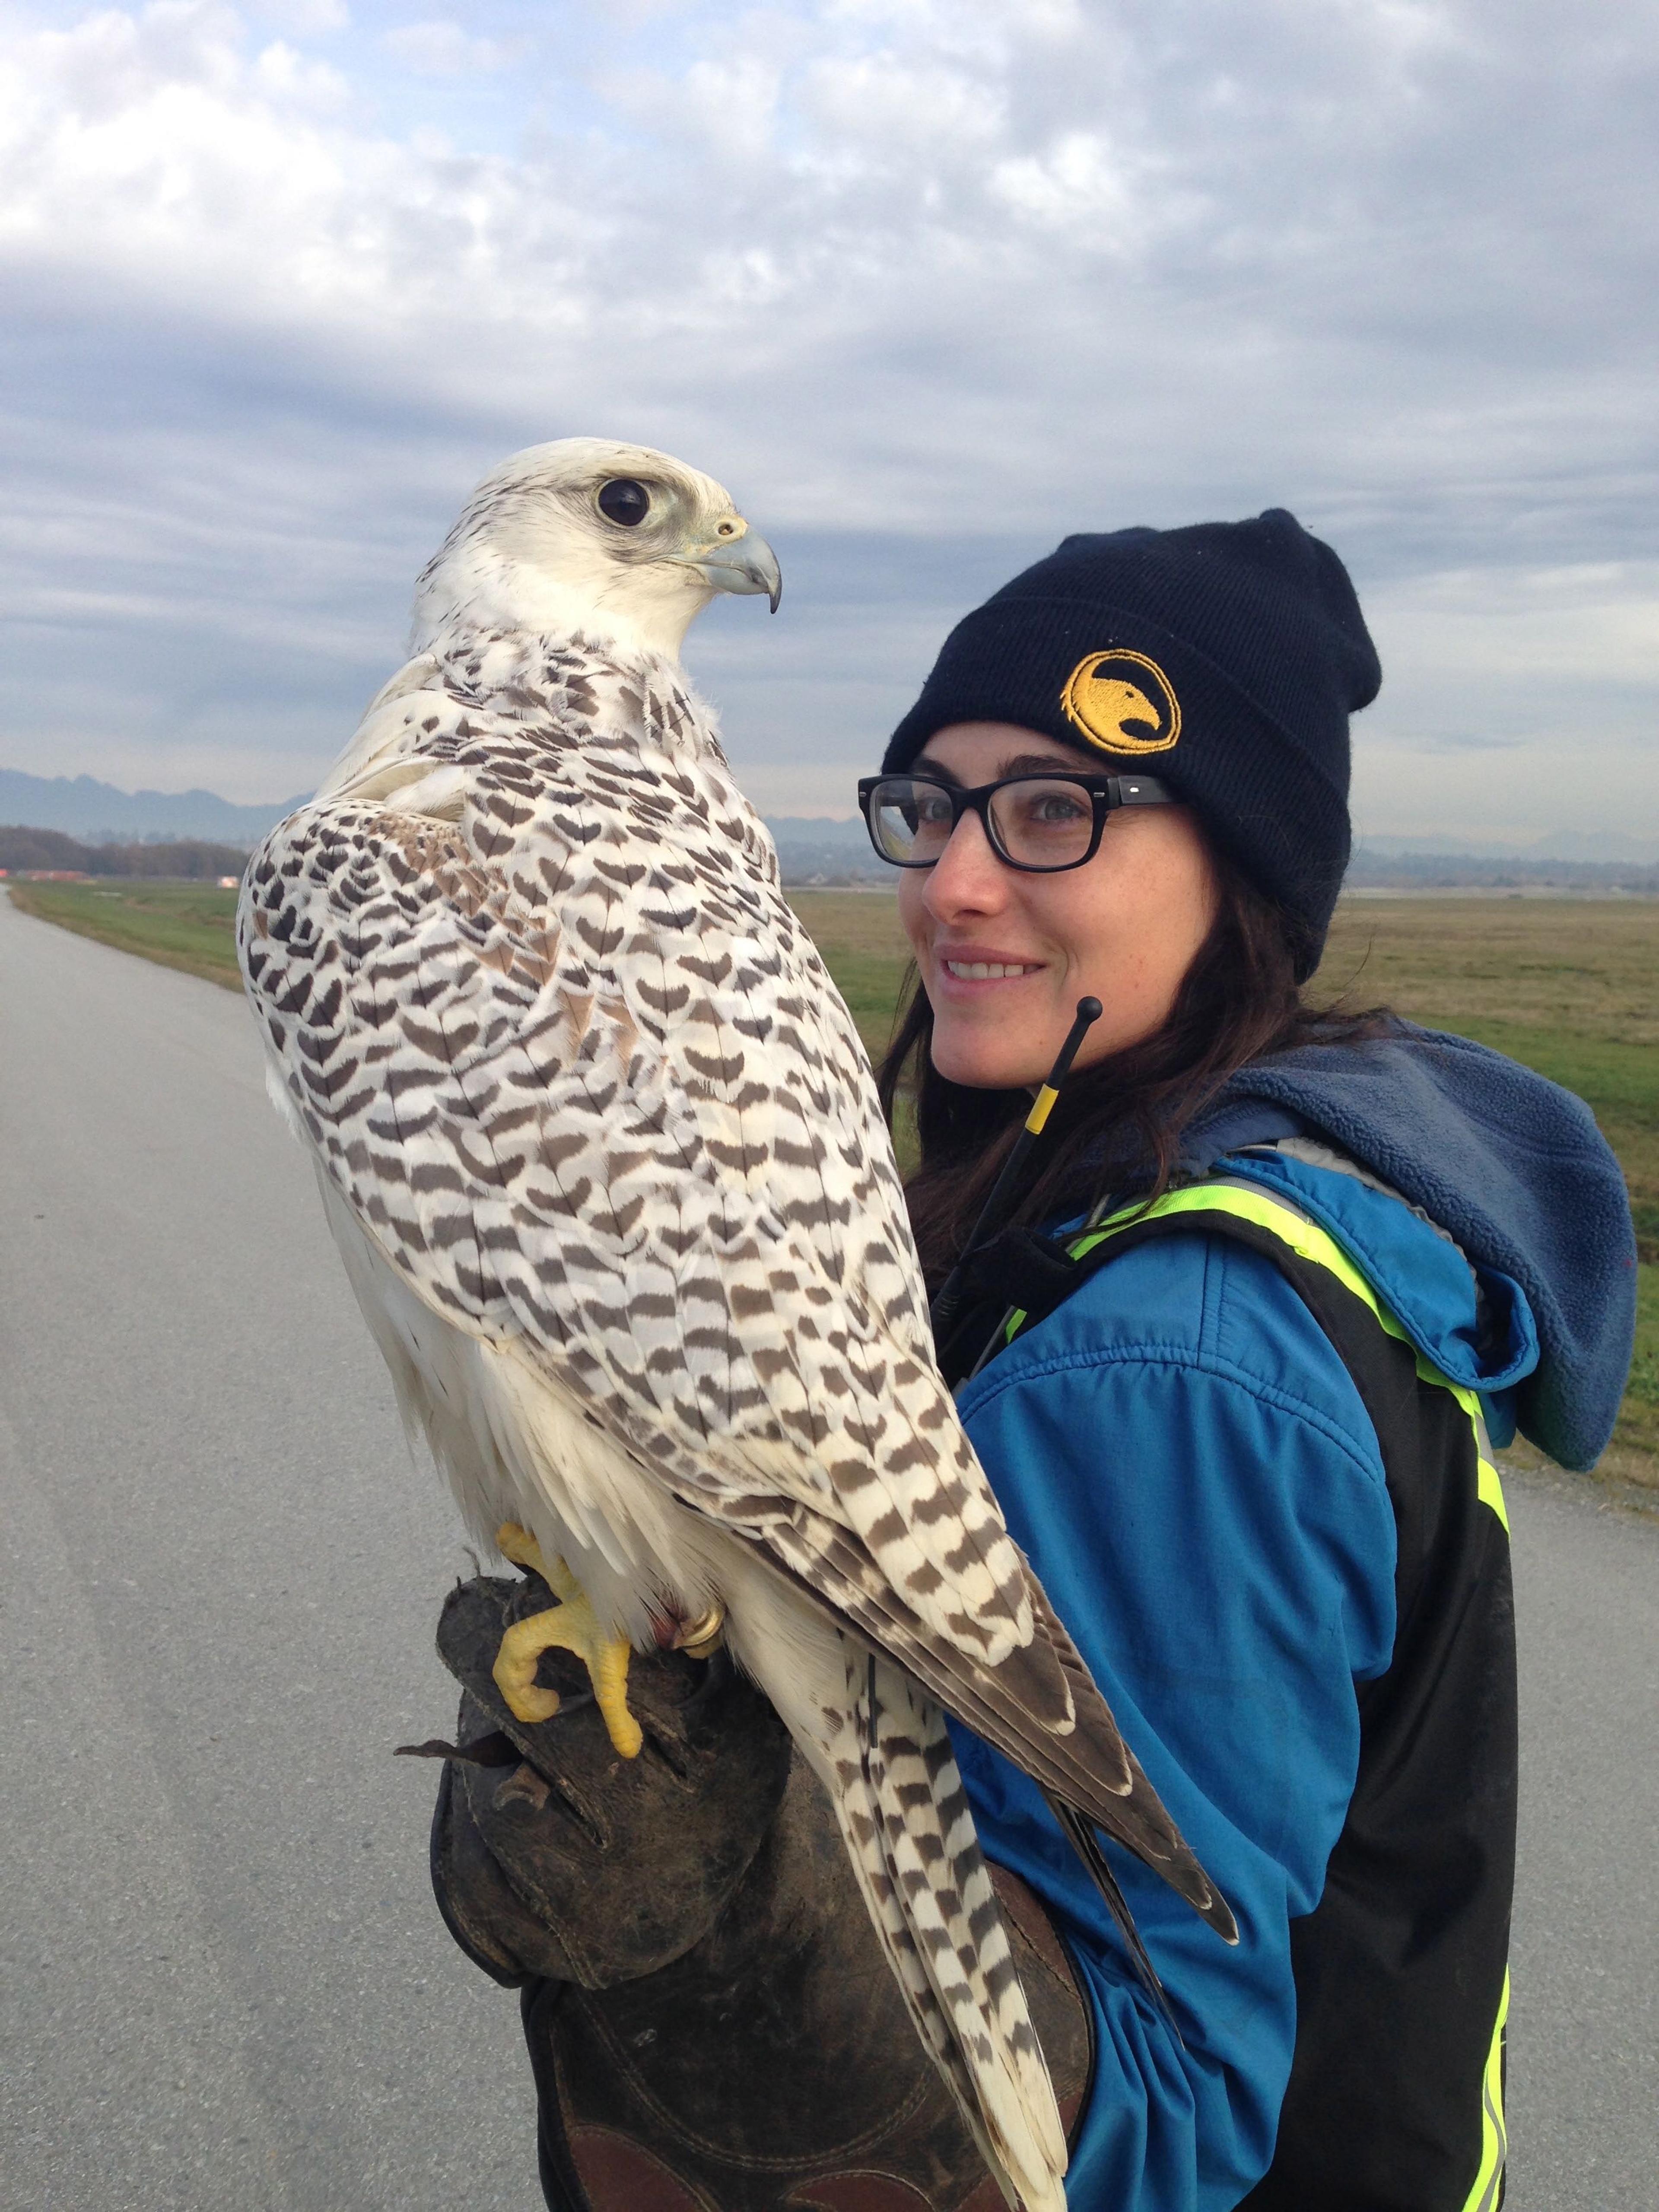 Woman in Raptors uniform stands with a white gyrfalcon on her glove